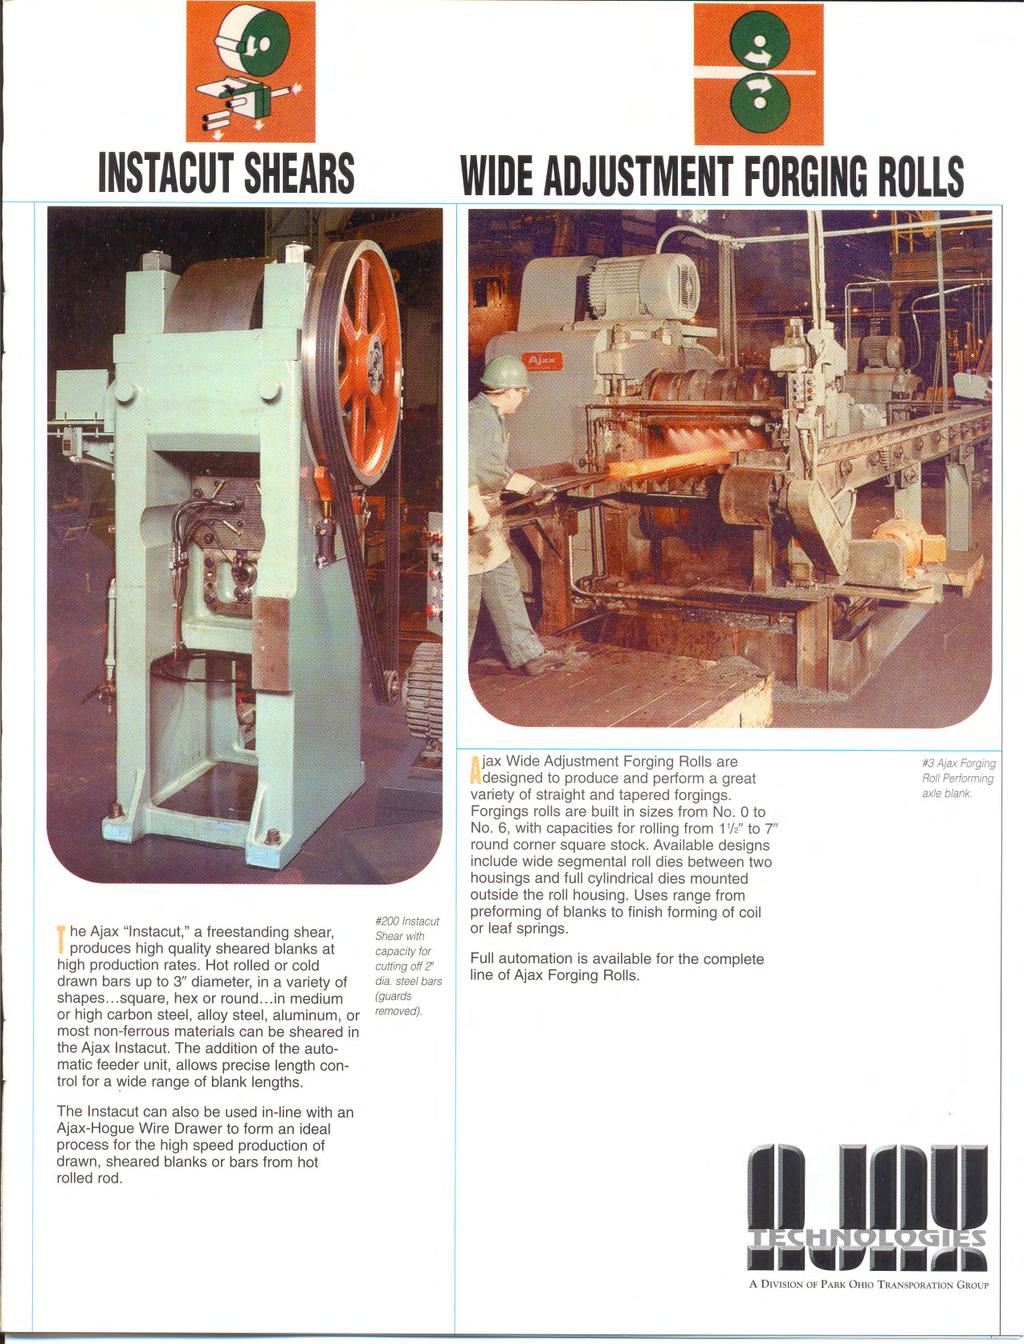 INSTACUTSHEARS WIDEADJUSTMENTFORGINGROLLS,he Ajax "Instacut," a freestanding shear, m produces high quality sheared blanks at high production rates.